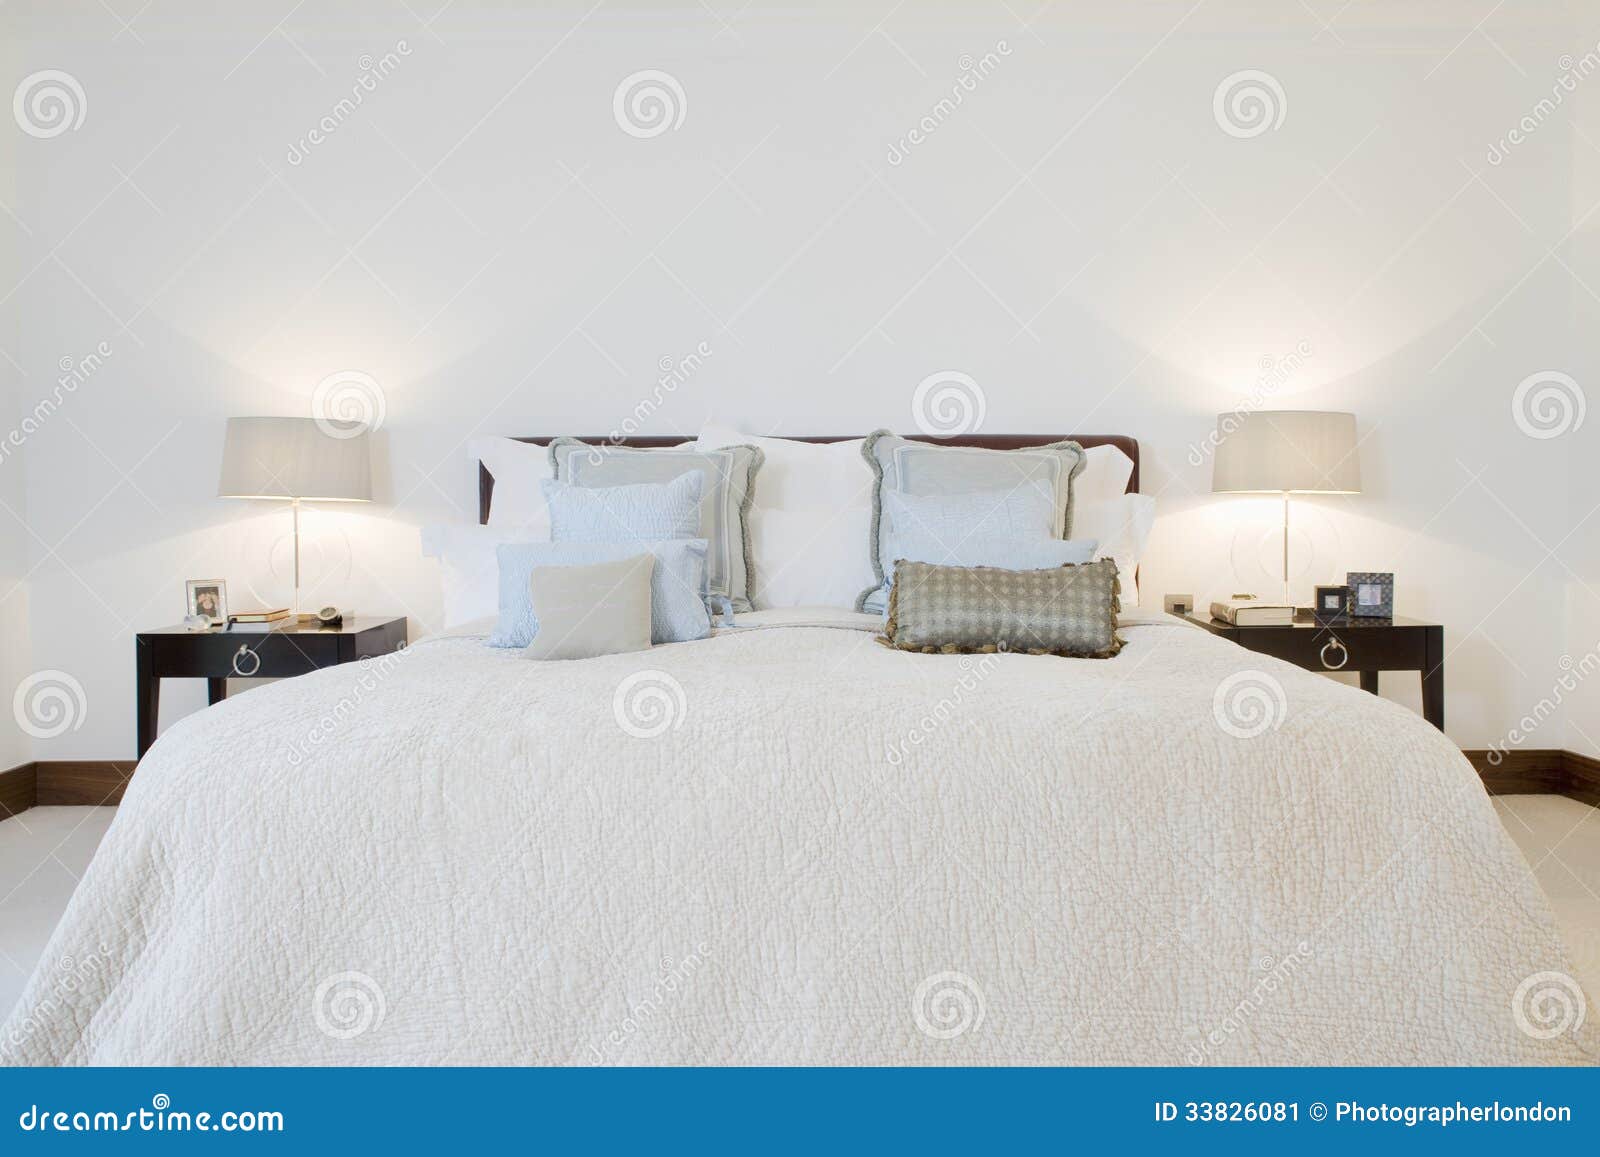 View of Bedroom stock image. Image of horizontal, home - 33826081